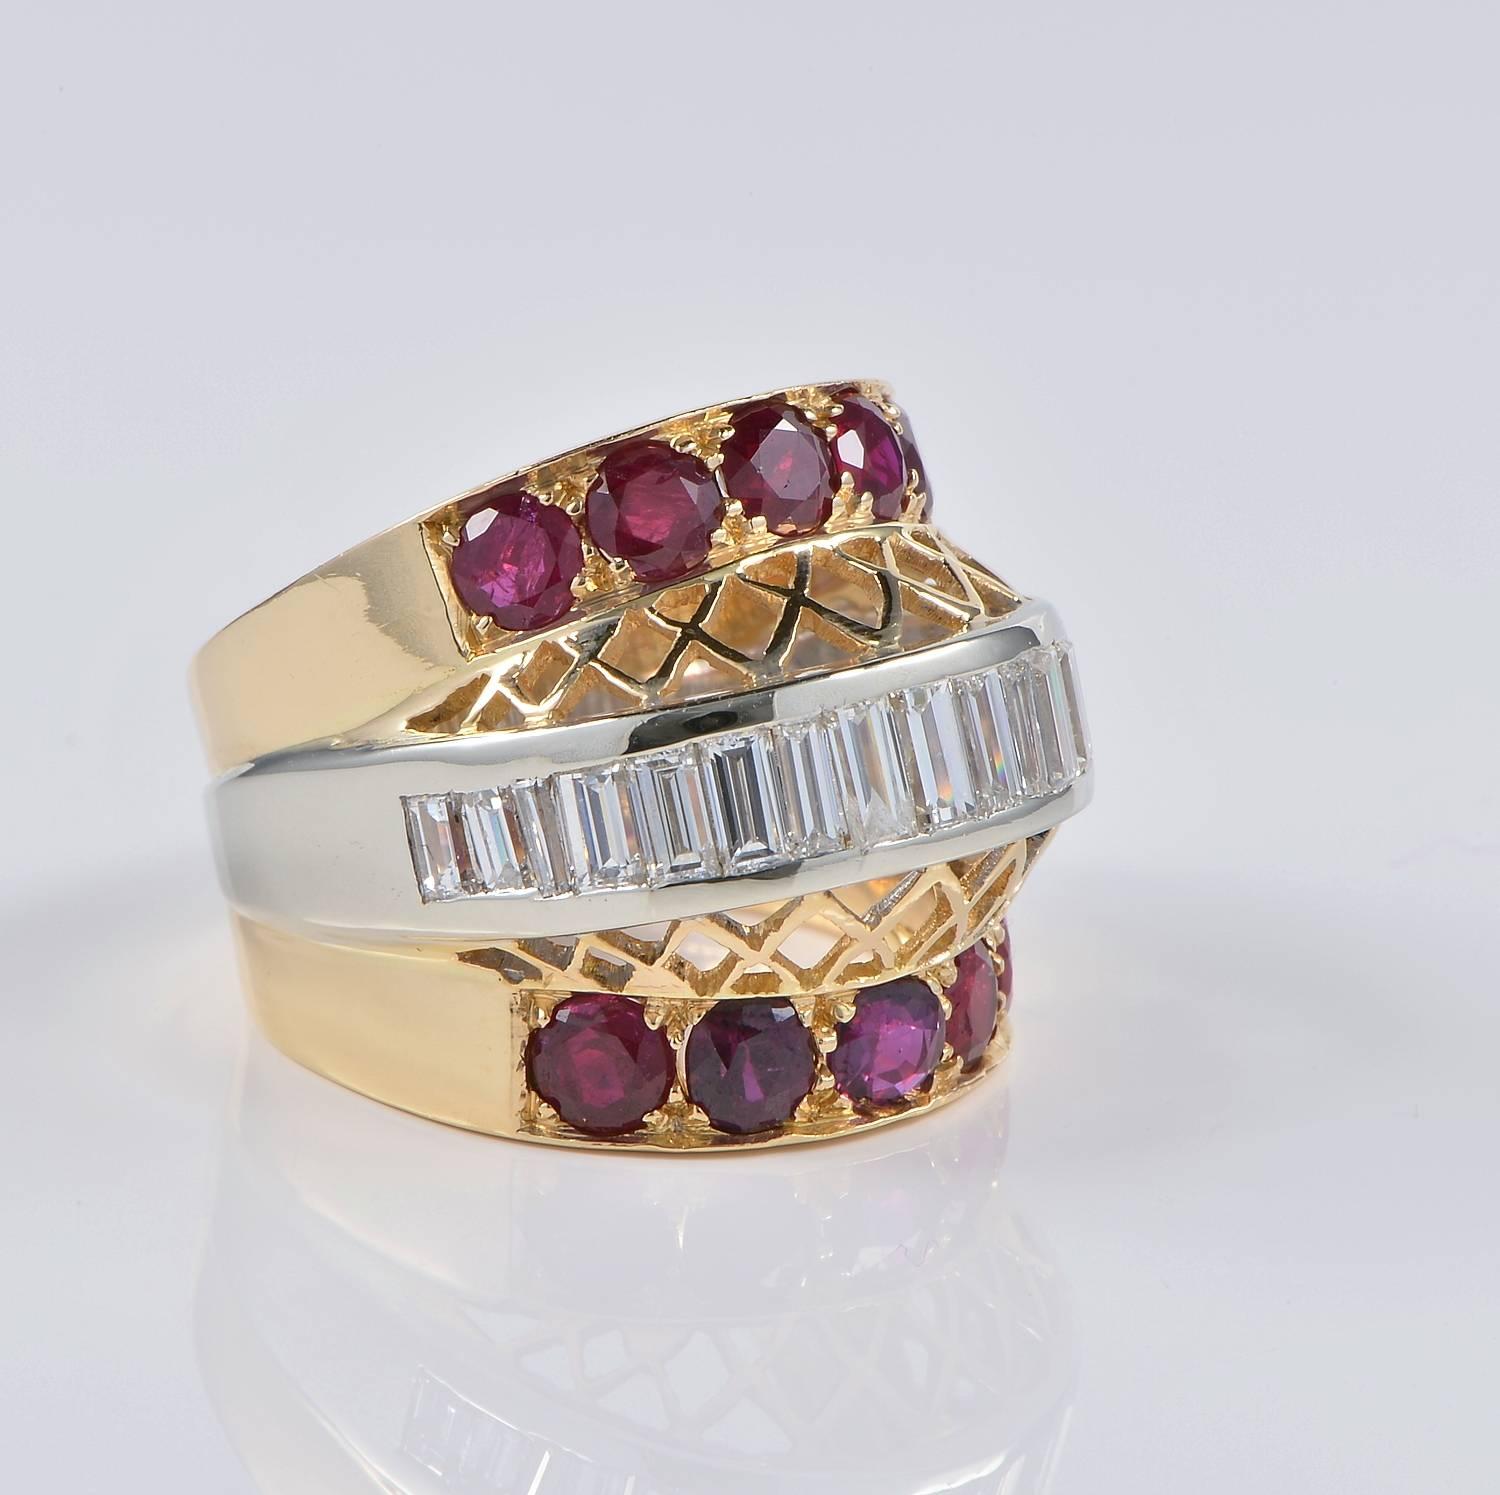 An impressive and unique Retro ring dating 1945 ca
Striking, bold and so wearable, expression of everlasting fashion. Will attract for the one off design and opulence of shimmering Diamonds and Red sensual Rubies
Superbly hand crafted of solid 18 Kt